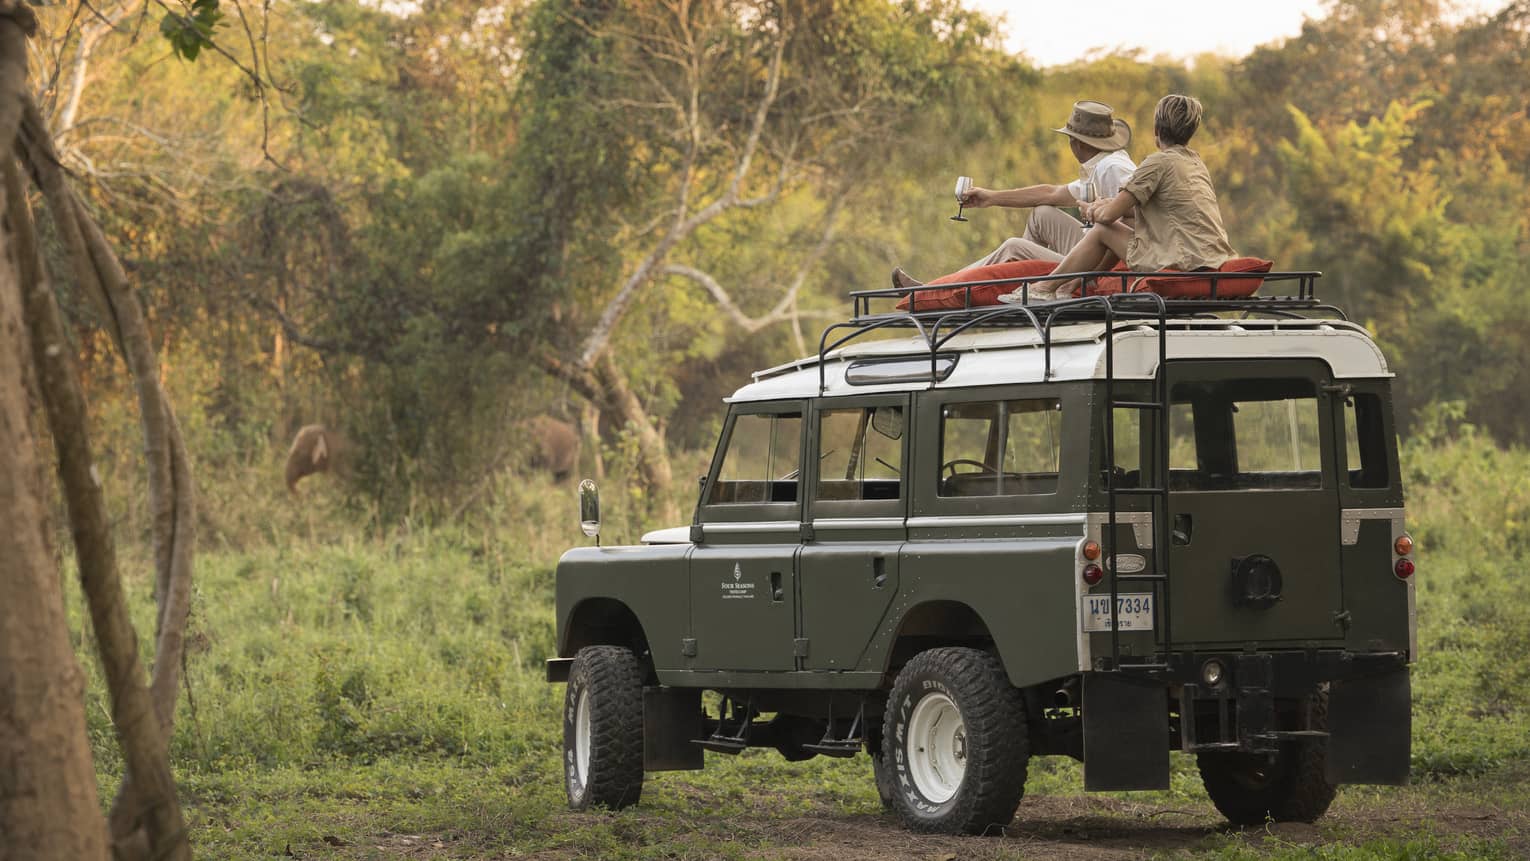 A couple sits on the roof of a Land Rover in the Bush, drinking a cocktail